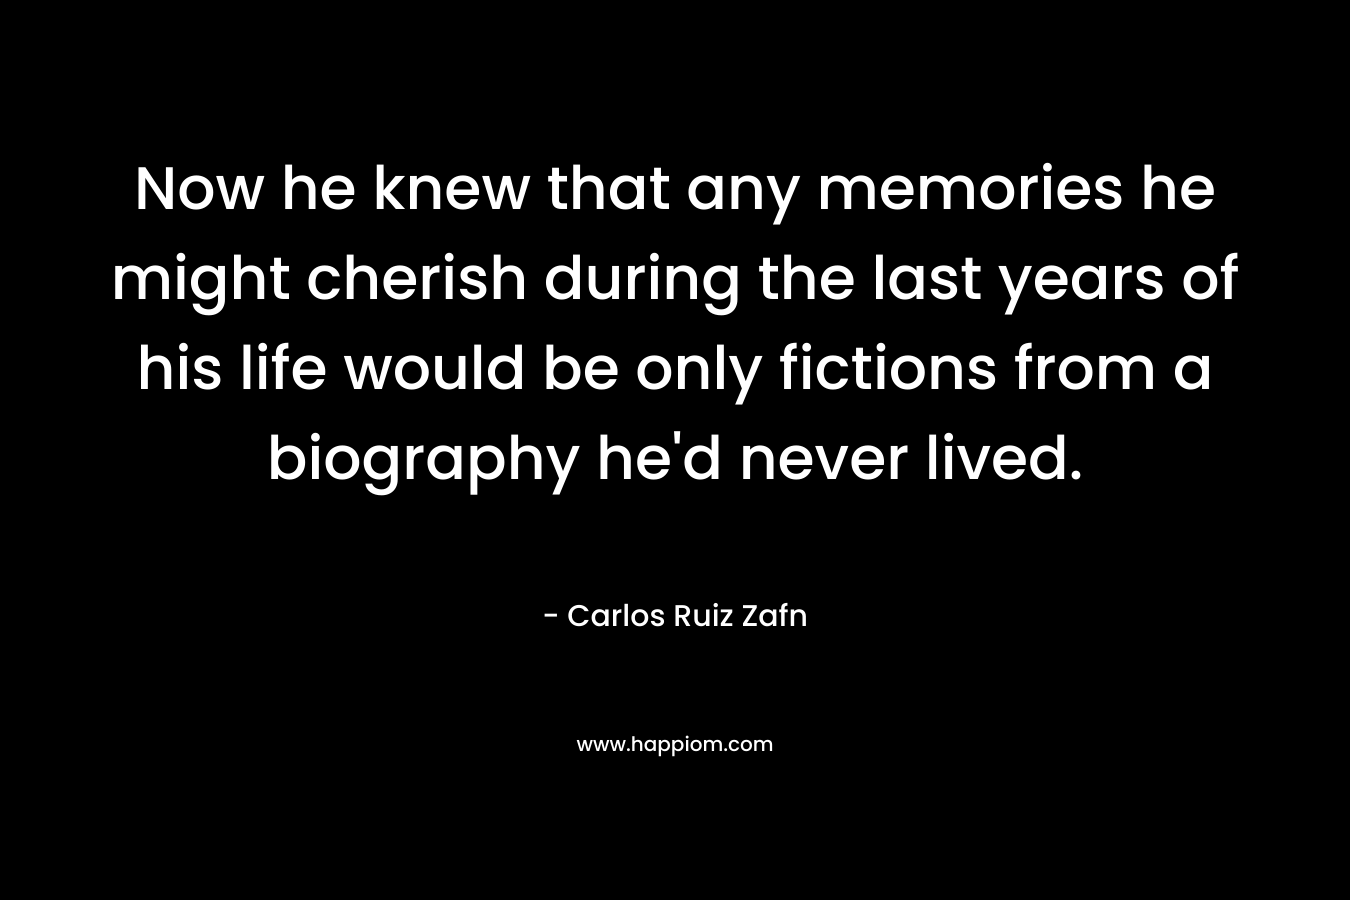 Now he knew that any memories he might cherish during the last years of his life would be only fictions from a biography he’d never lived. – Carlos Ruiz Zafn